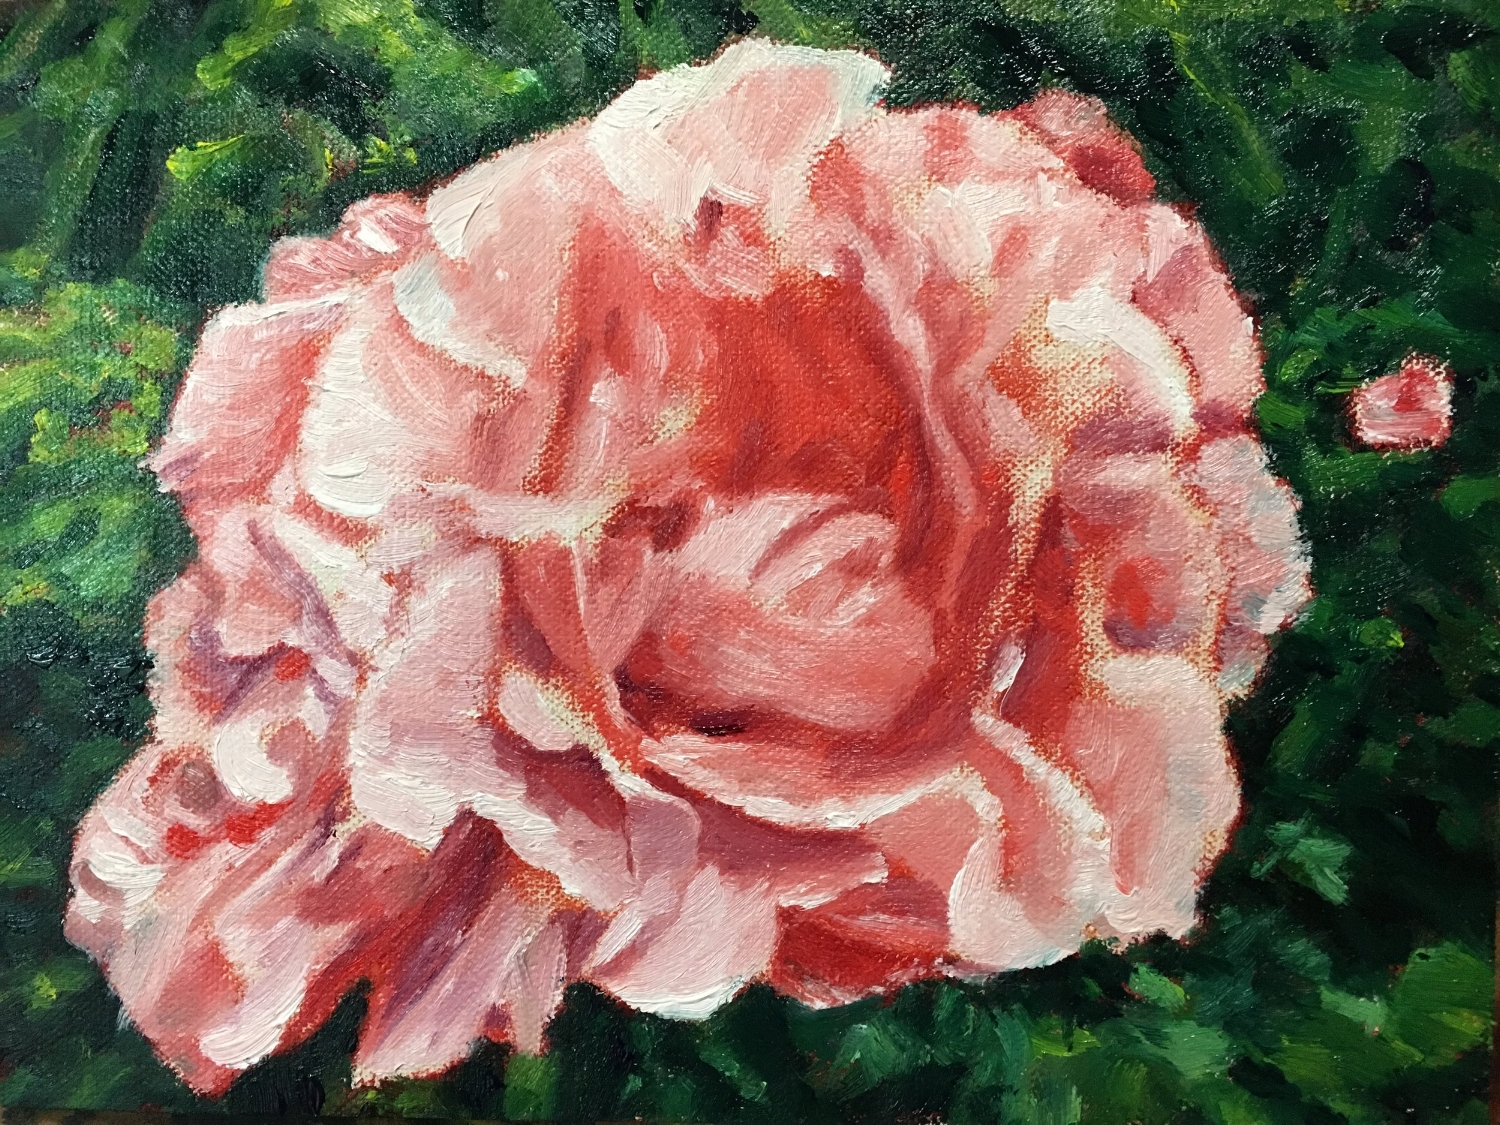 Quick Study of Rose at Musee Rodin Garden (07 April 2018)